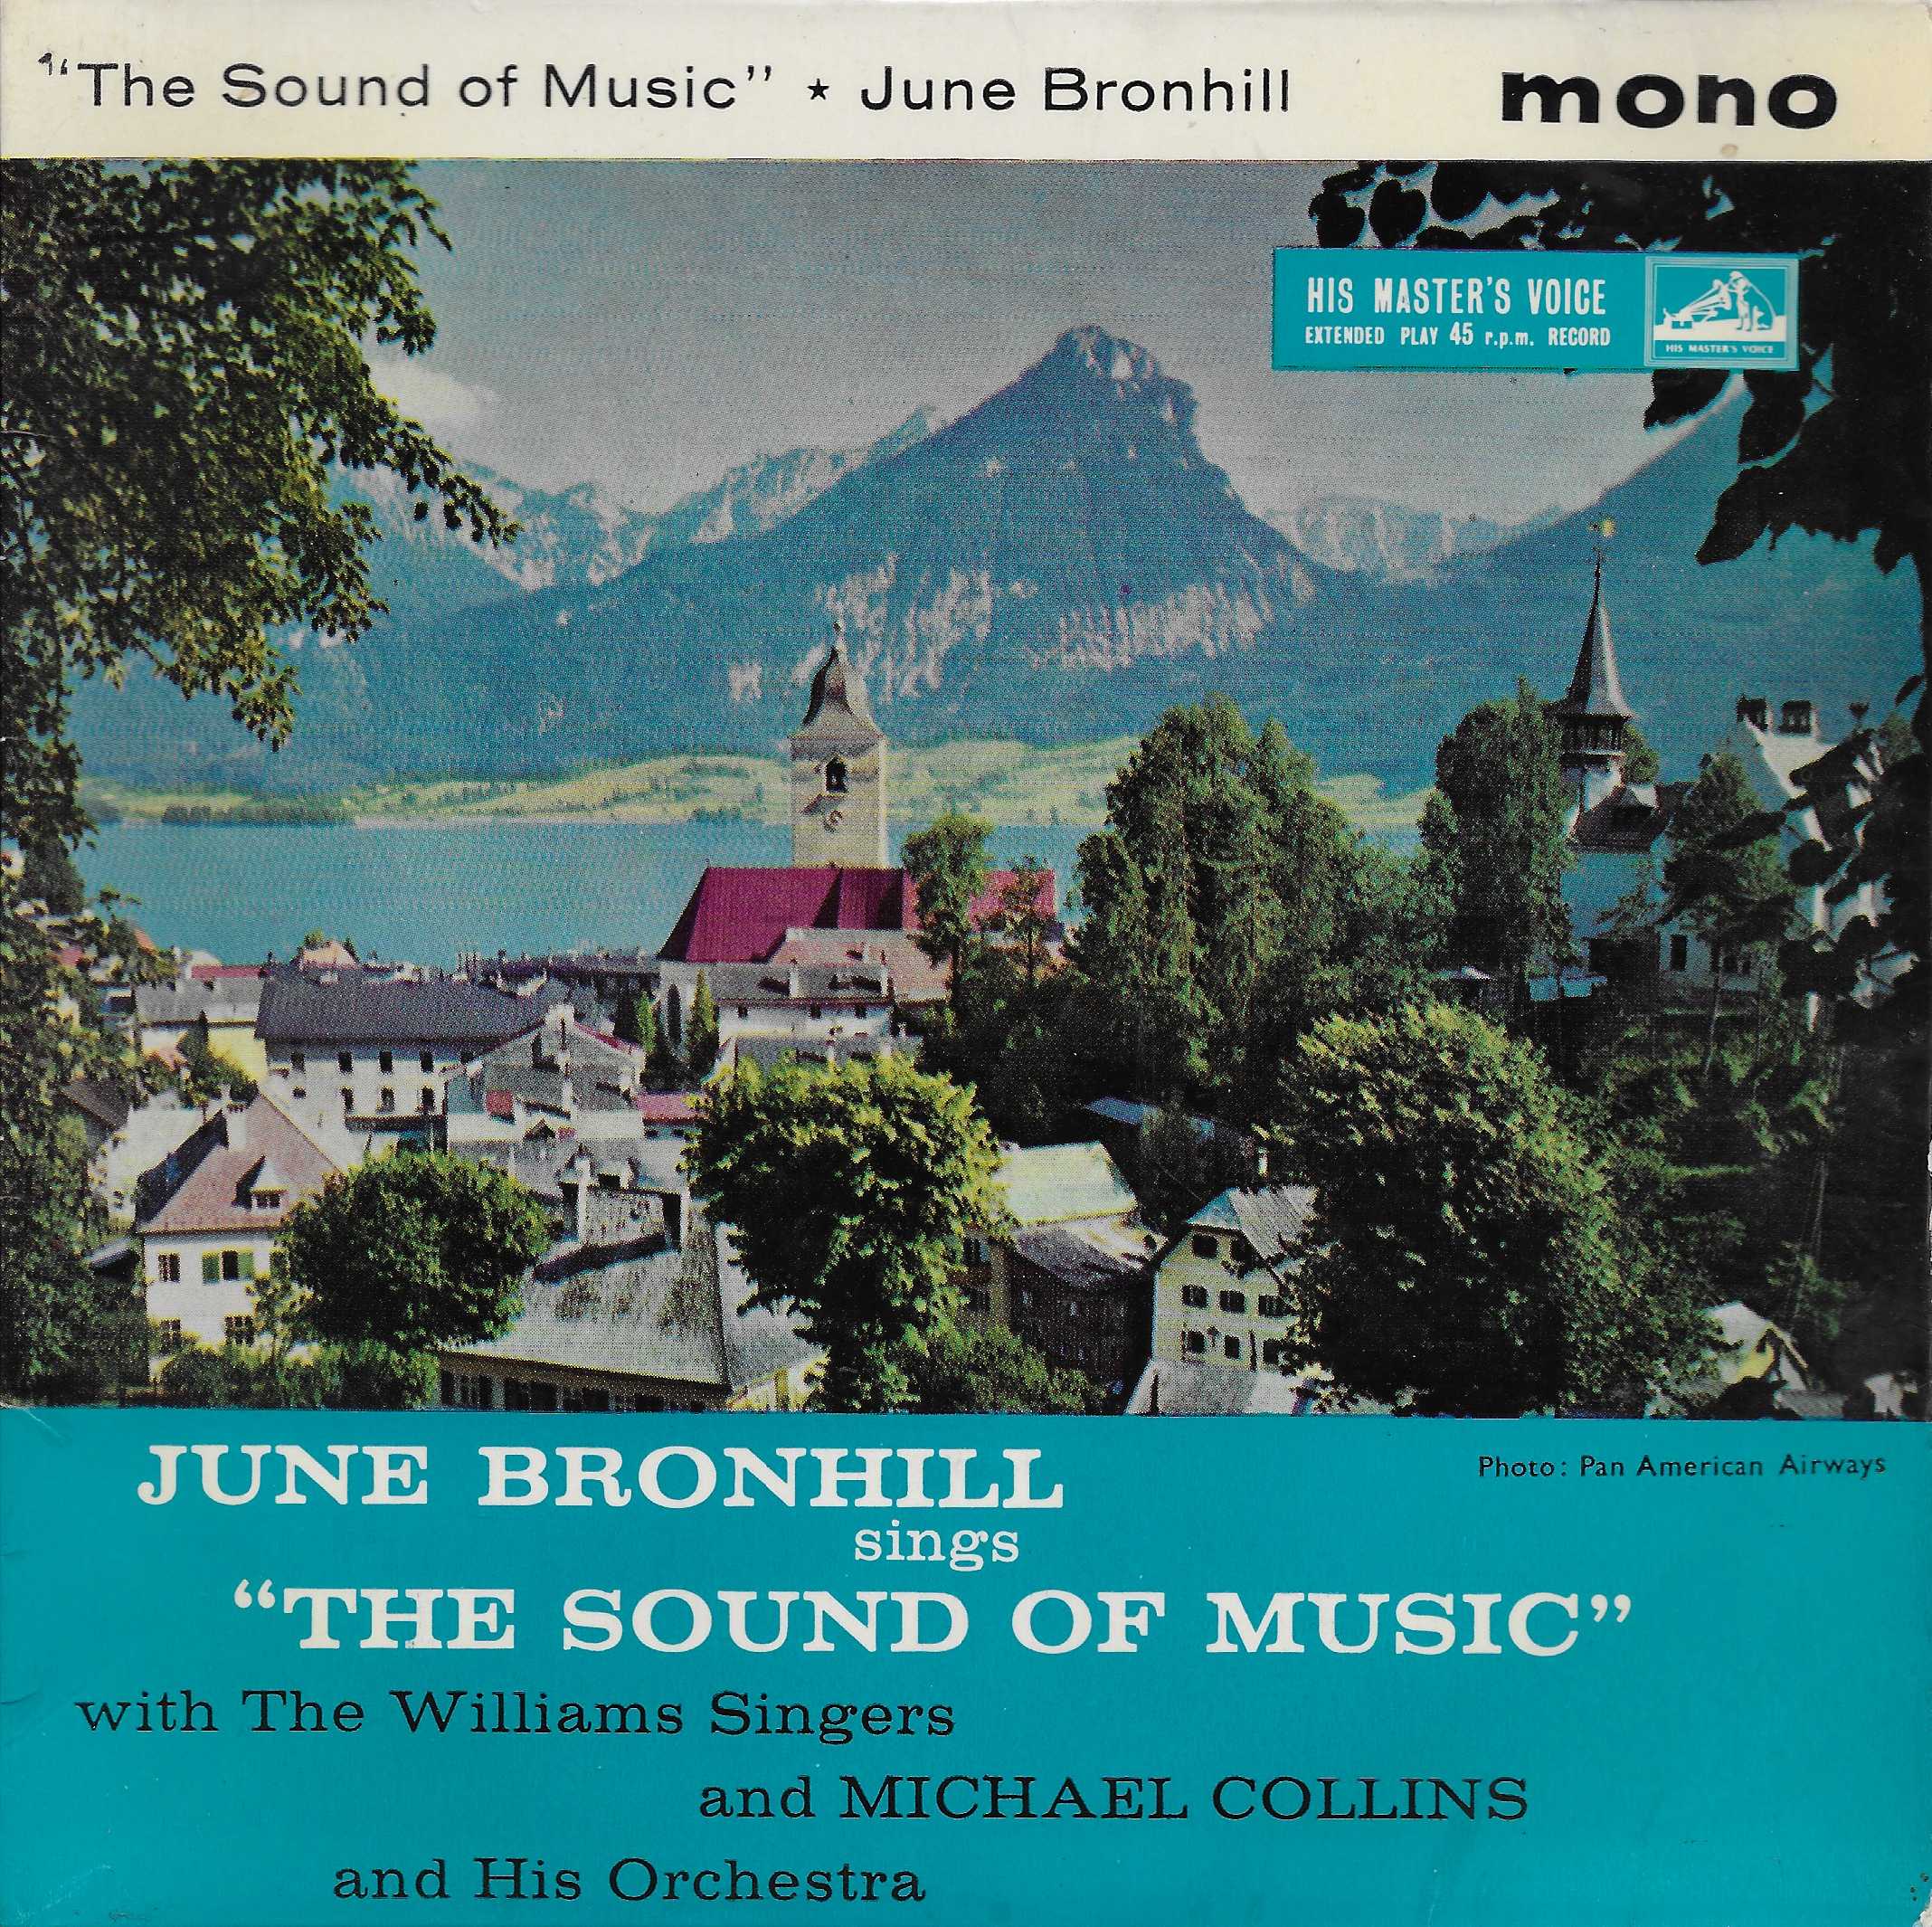 Picture of 7EG 8695 The sound of music by artist Rogers / Hammerstein II / June Bronhill with the Williams Singers and Michael Collins and his orchestra